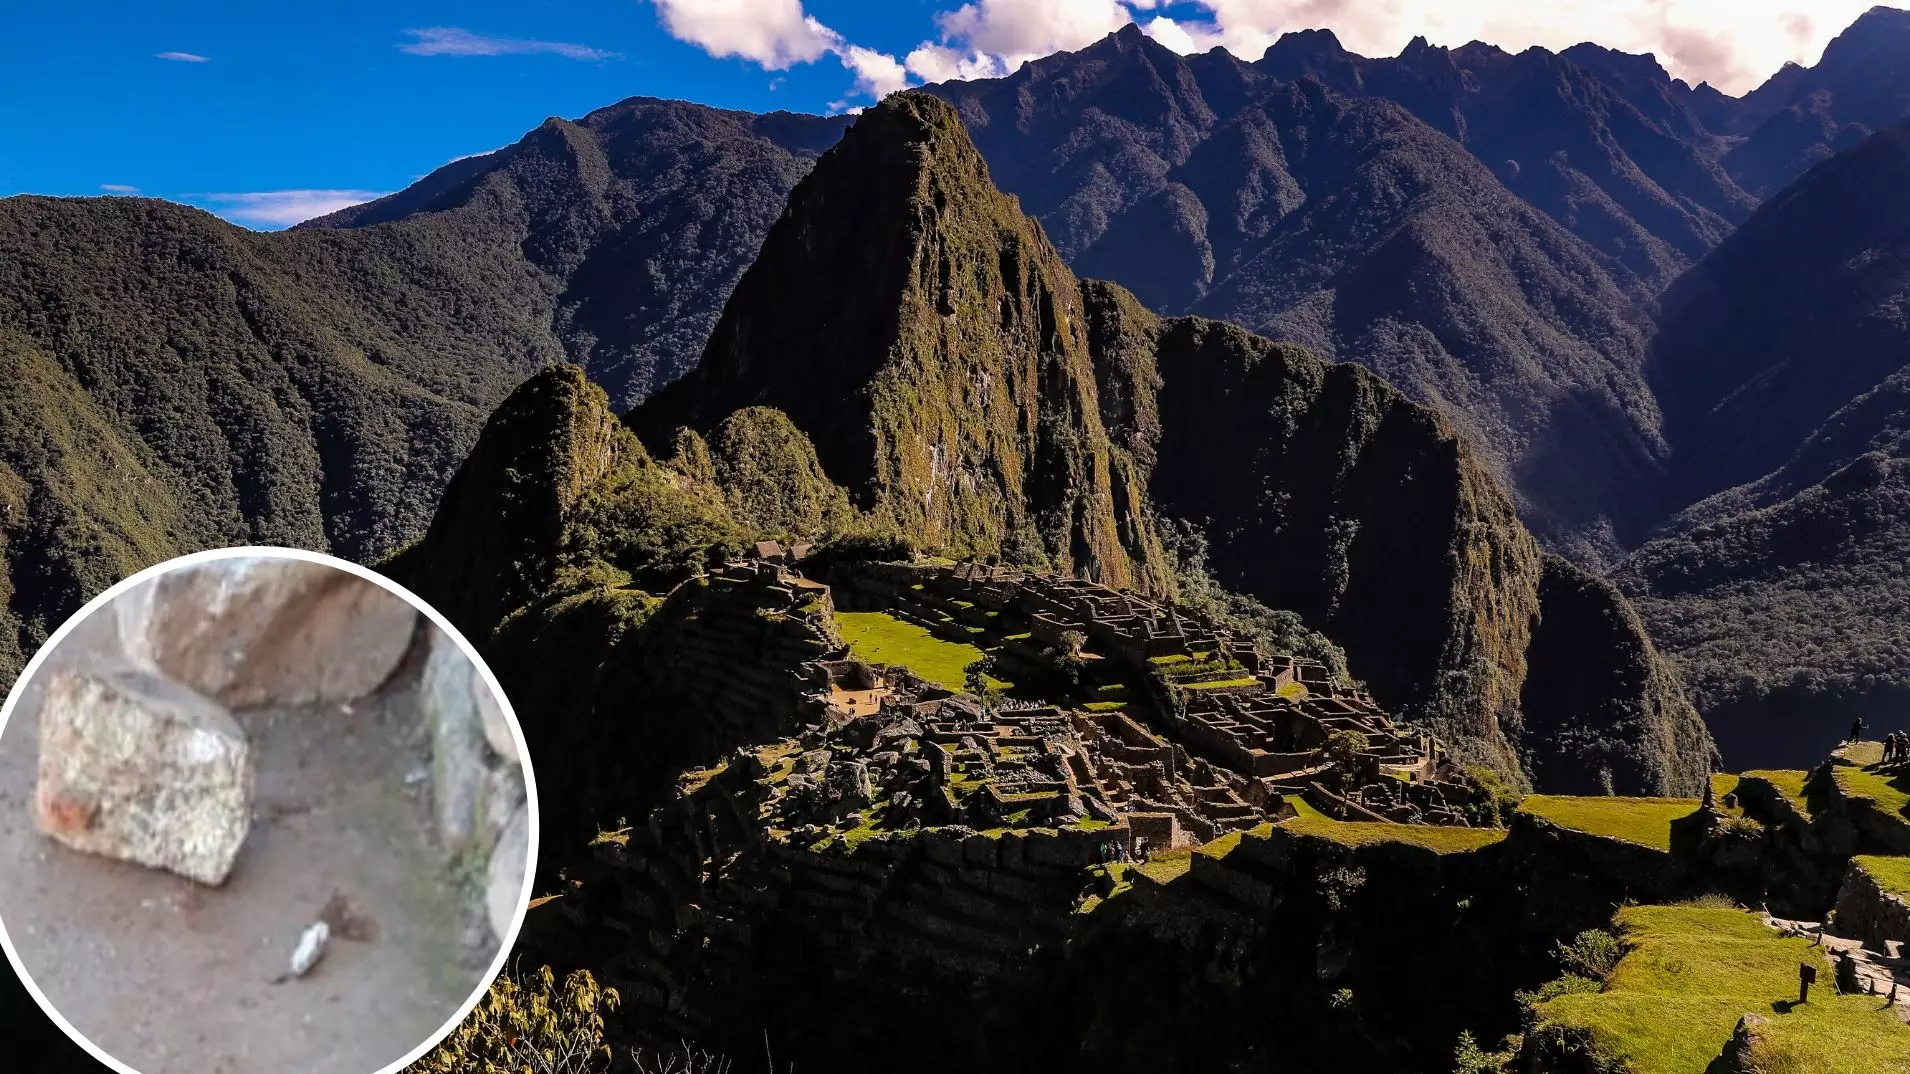 Police Investigate Tourists For 'Damaging and Defecating On' Machu Picchu